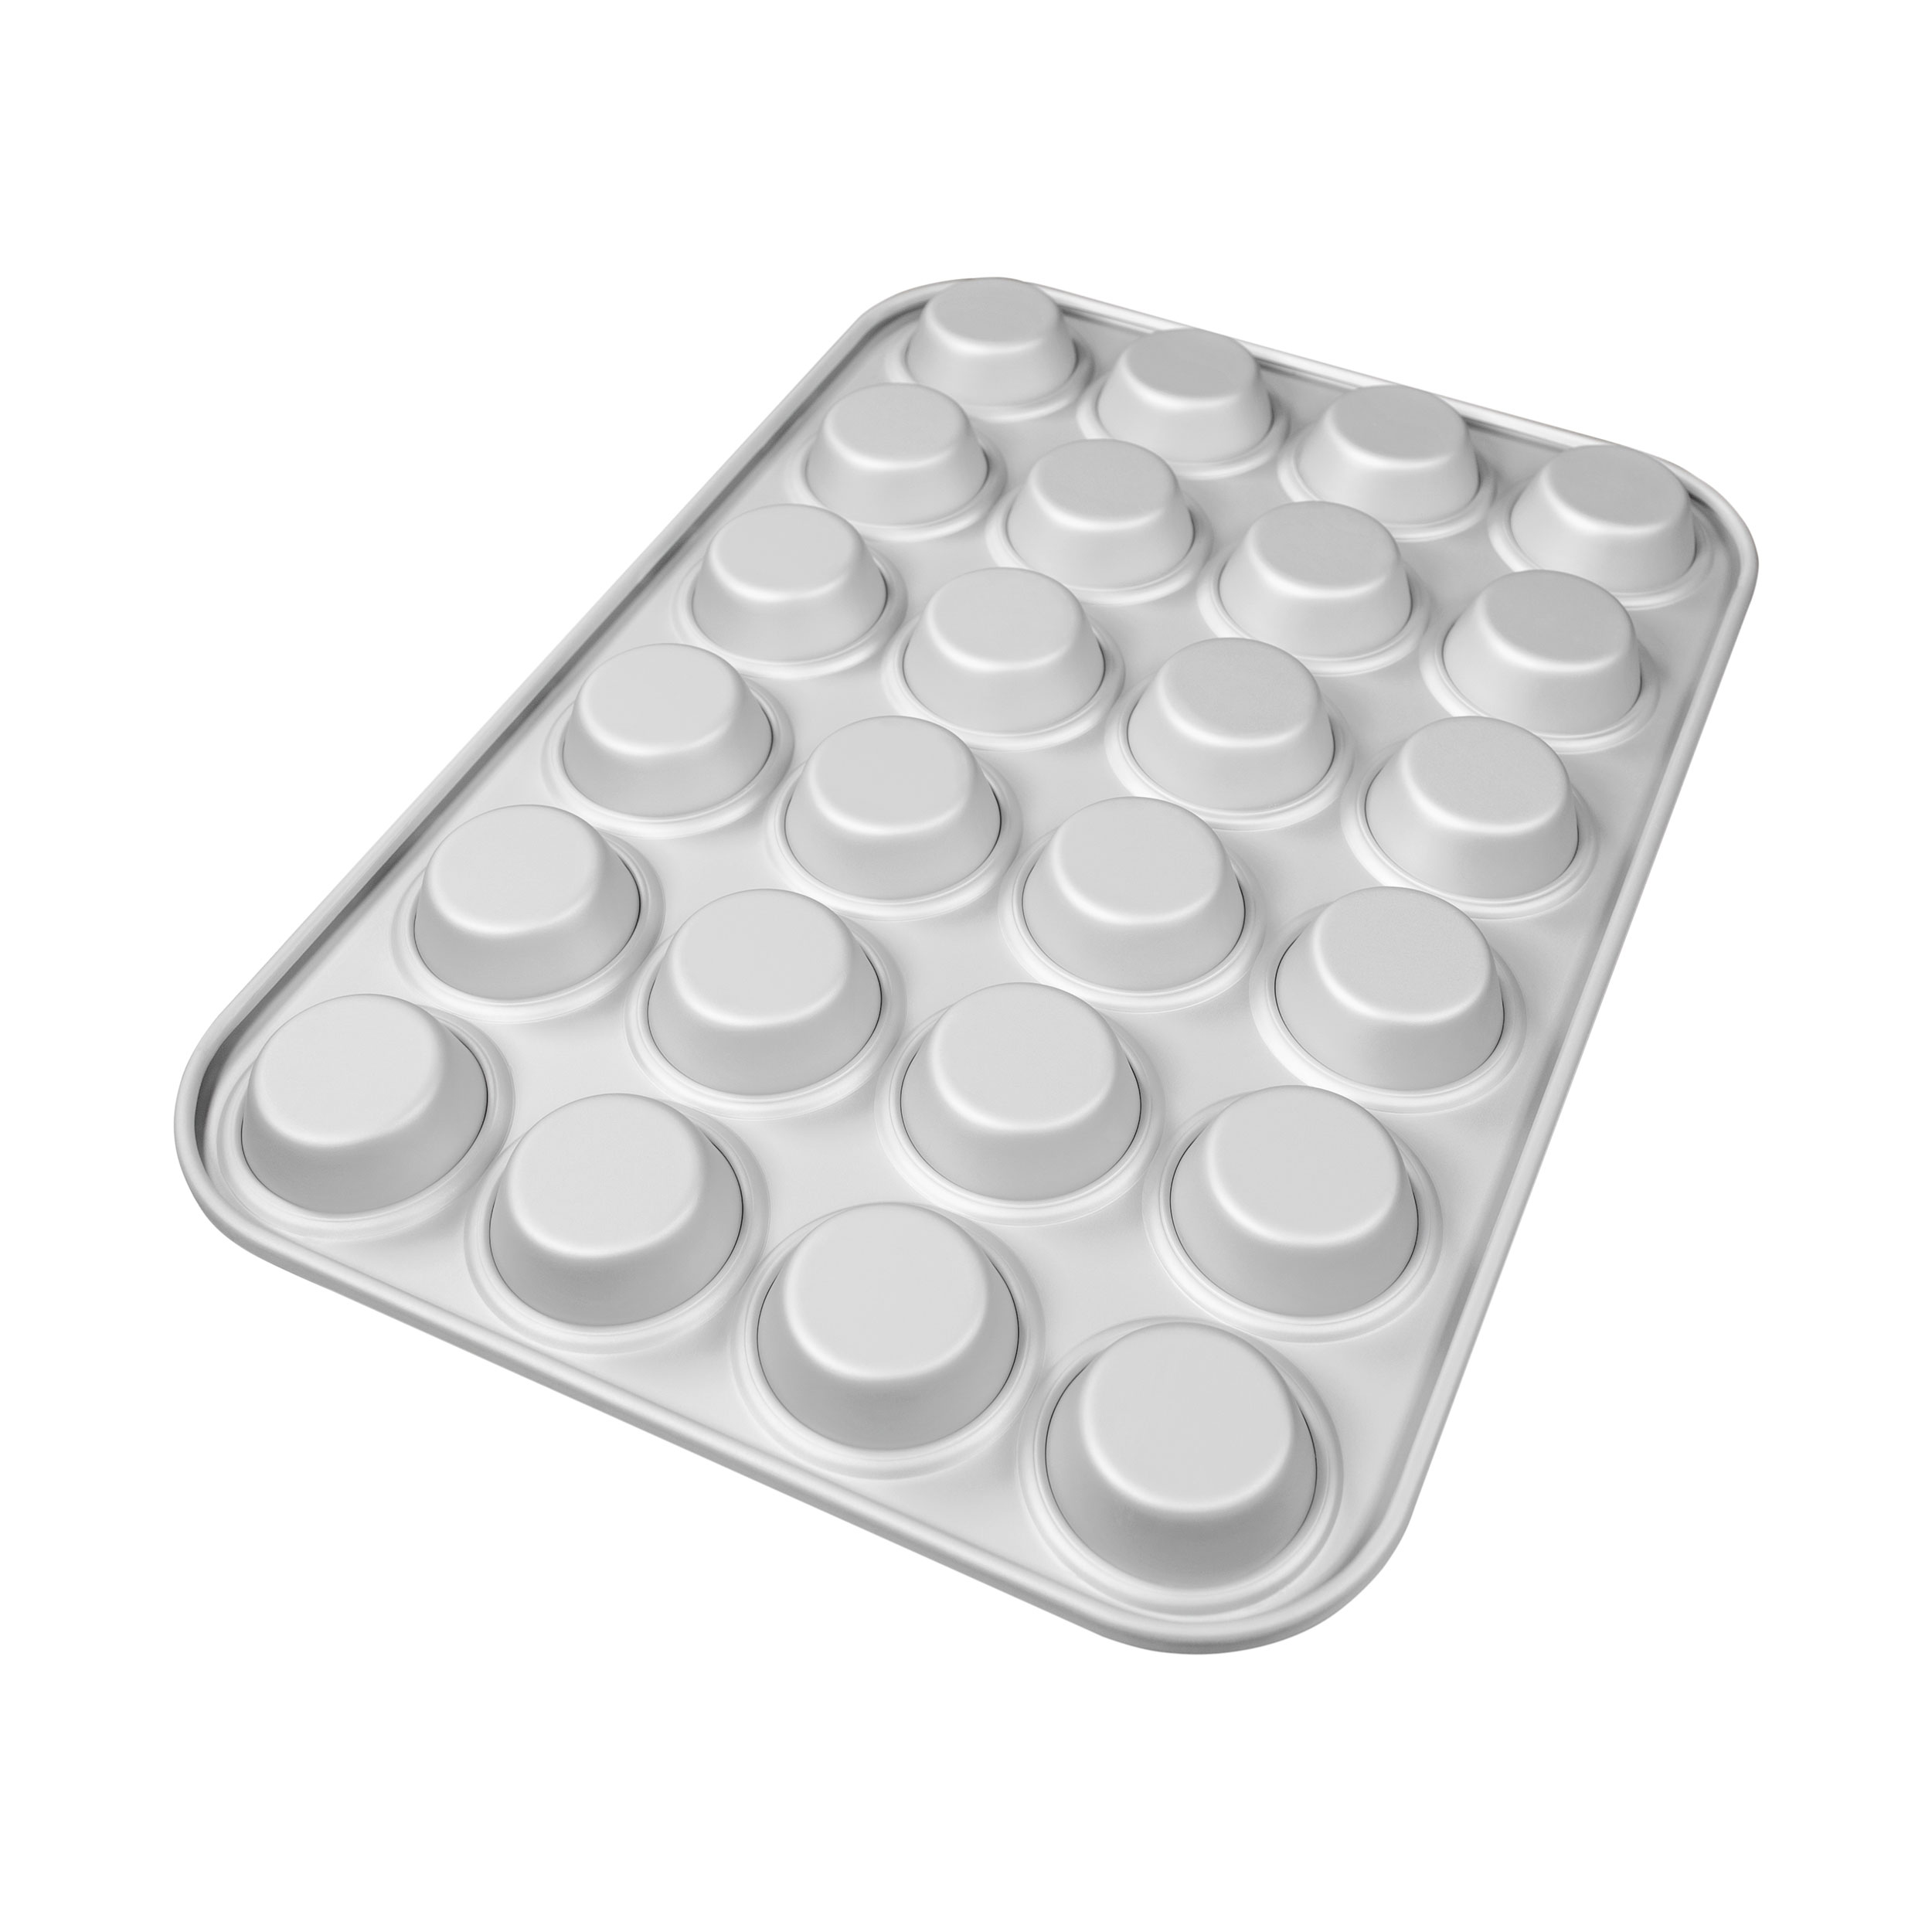 Standard Muffin-Cupcake Pan 12 Cavity 2 x 2-3/4 Inches by Fat